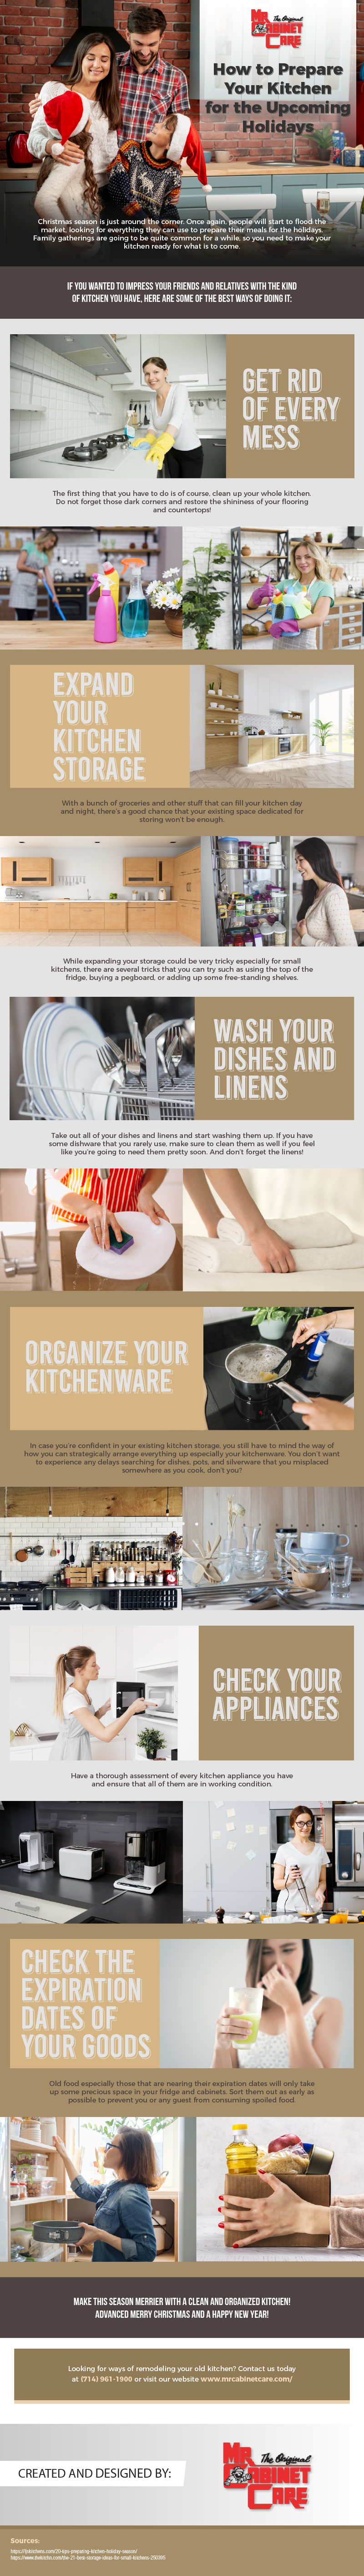 How to Prepare Your Kitchen for the Upcoming Holidays